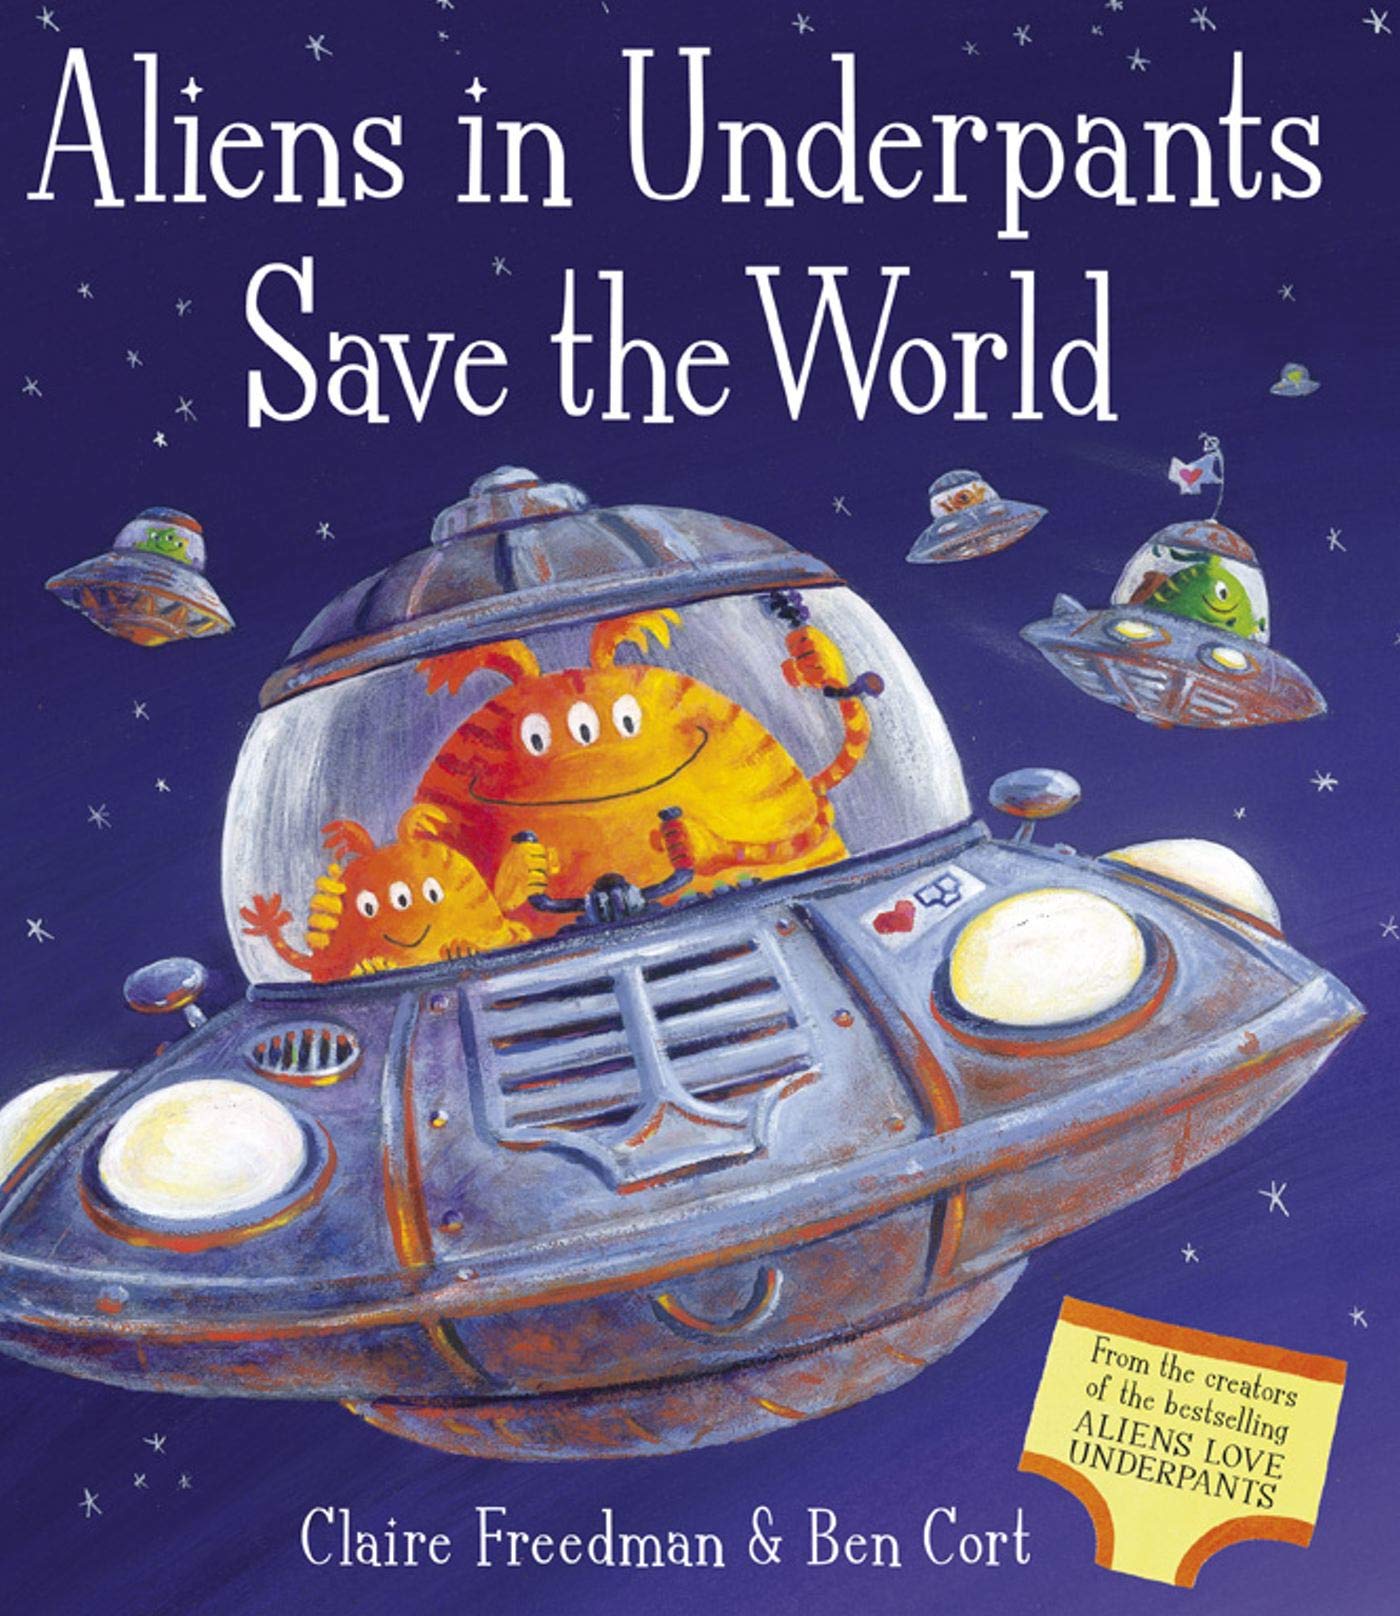 Aliens in Underpants Save the World by Claire Freedman and Ben Cort